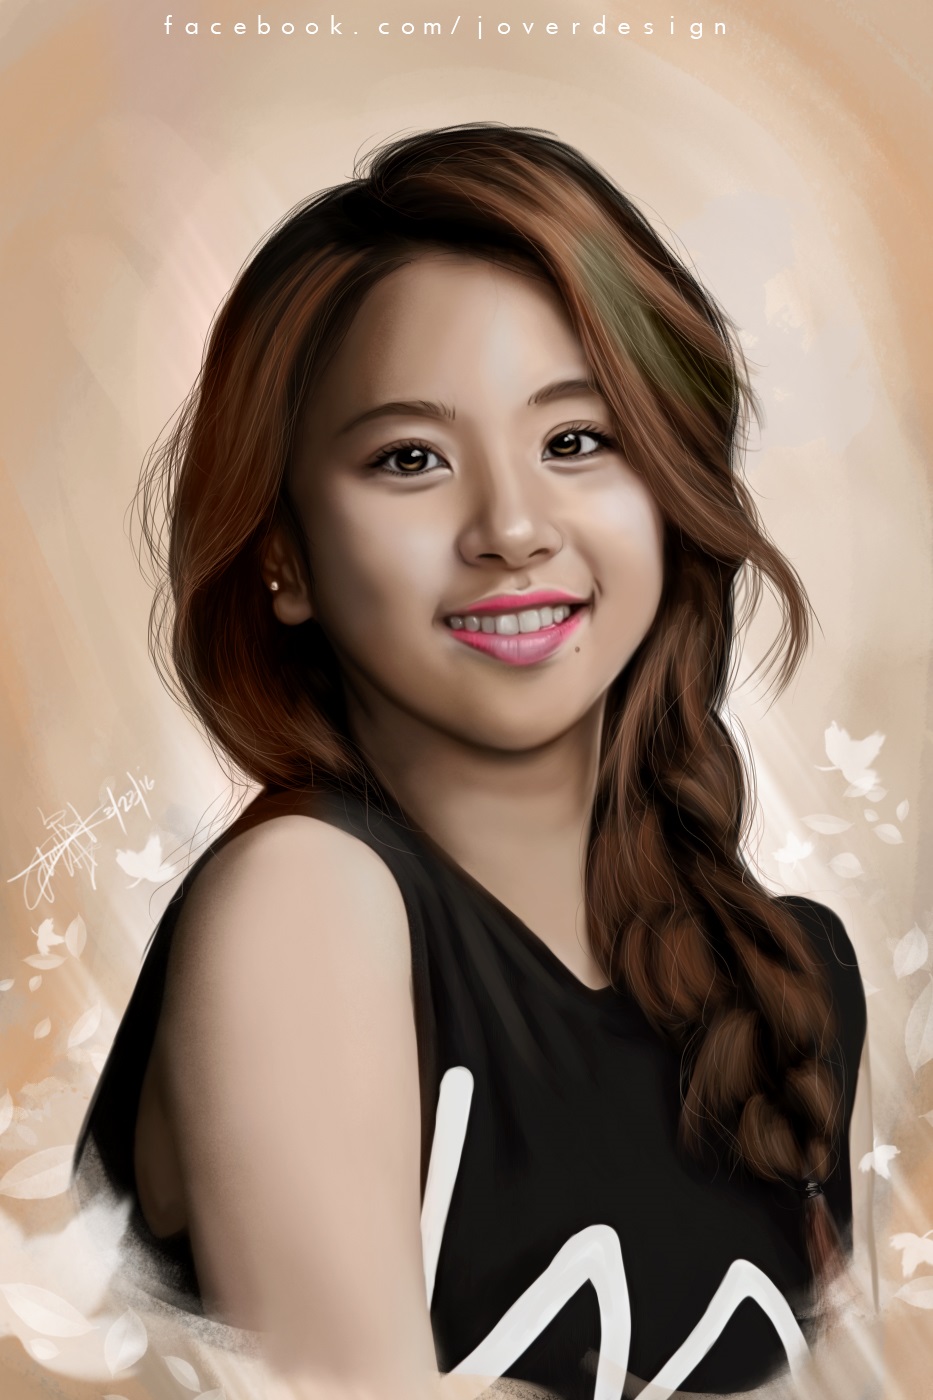 Twice Chaeyoung By Jover Design